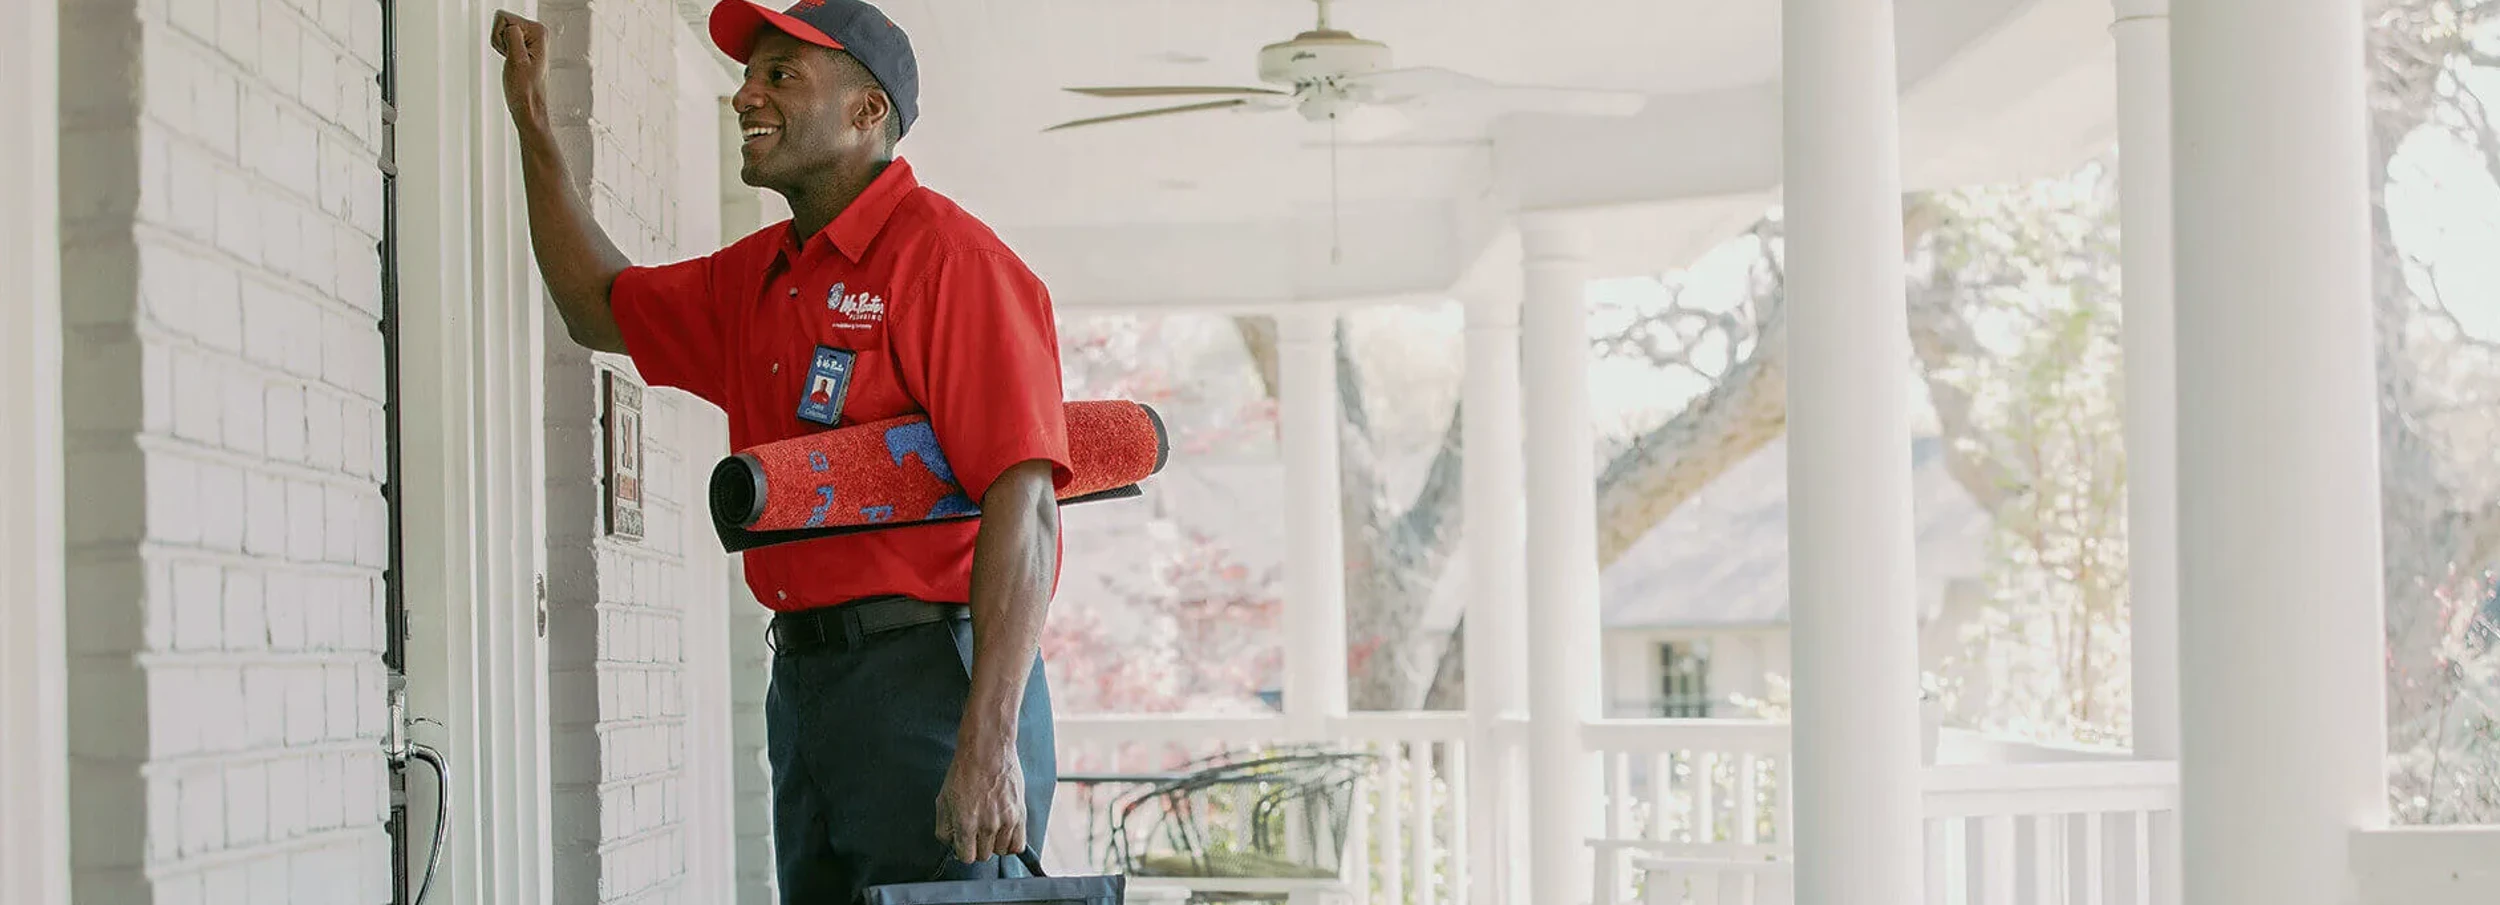 Smiling Mr. Rooter employee knocking on the door of a customer's home.